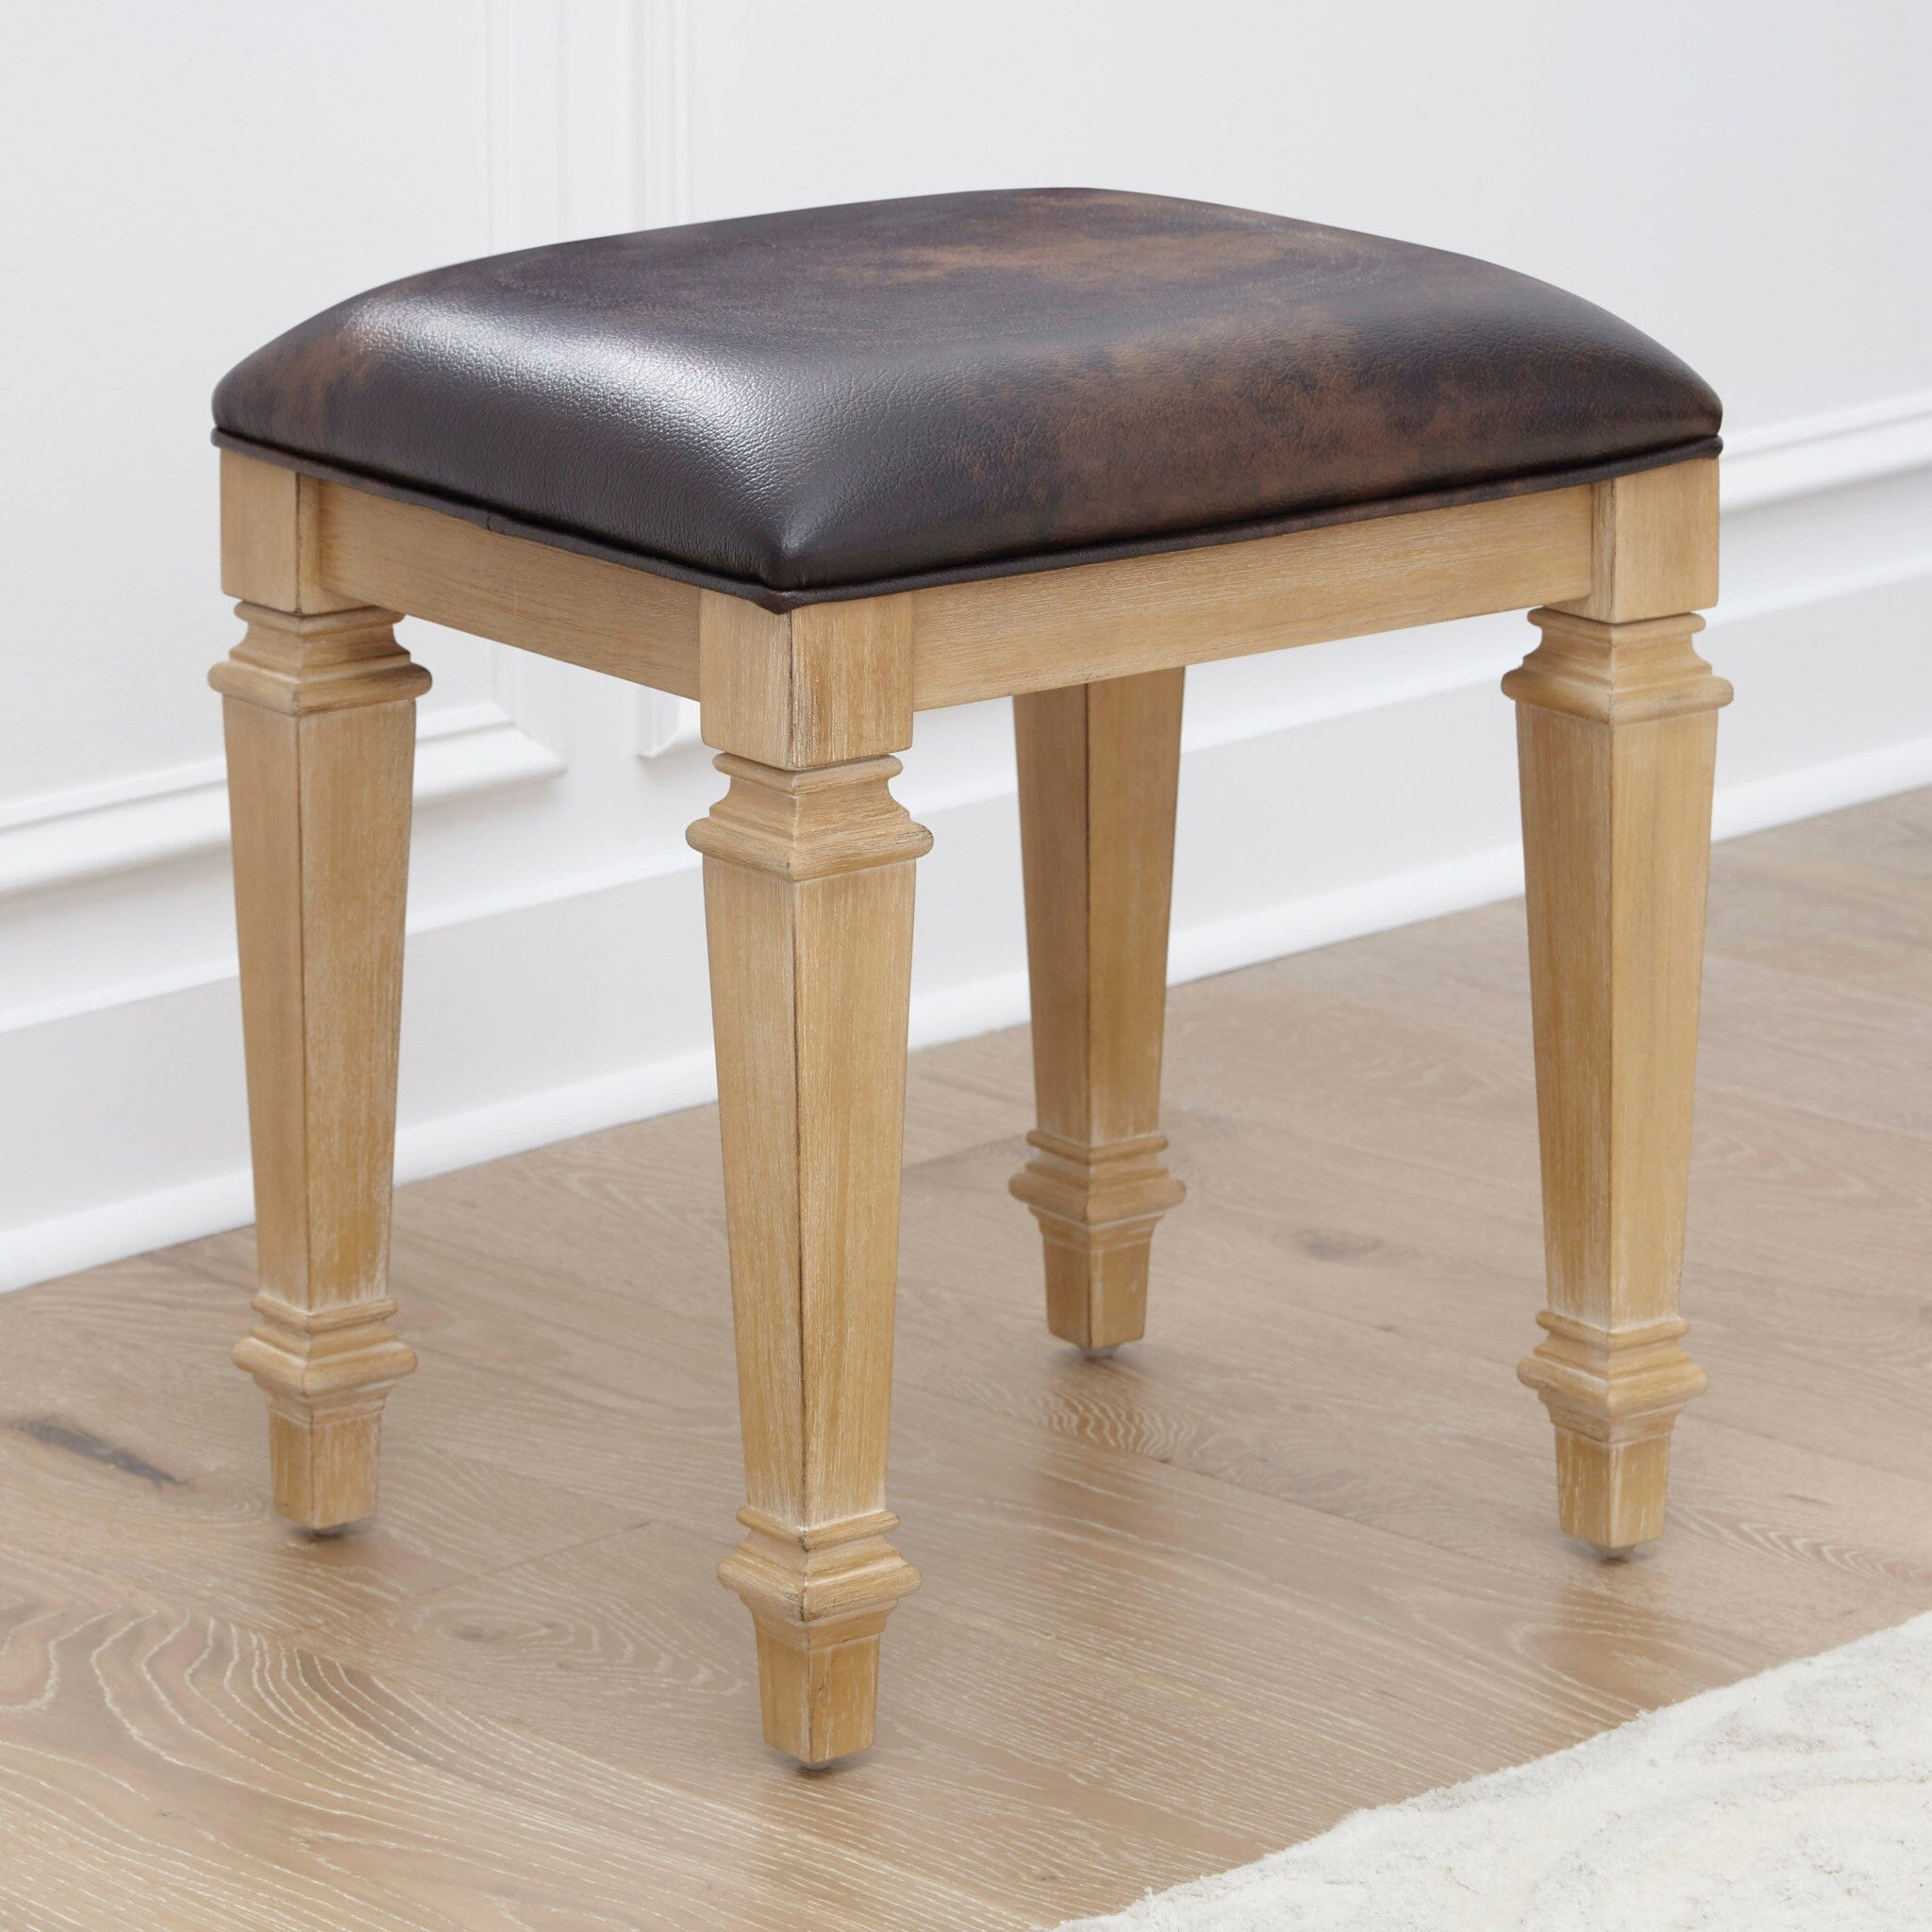 Traditional Vanity Bench By Manor House Vanity Bench Manor House